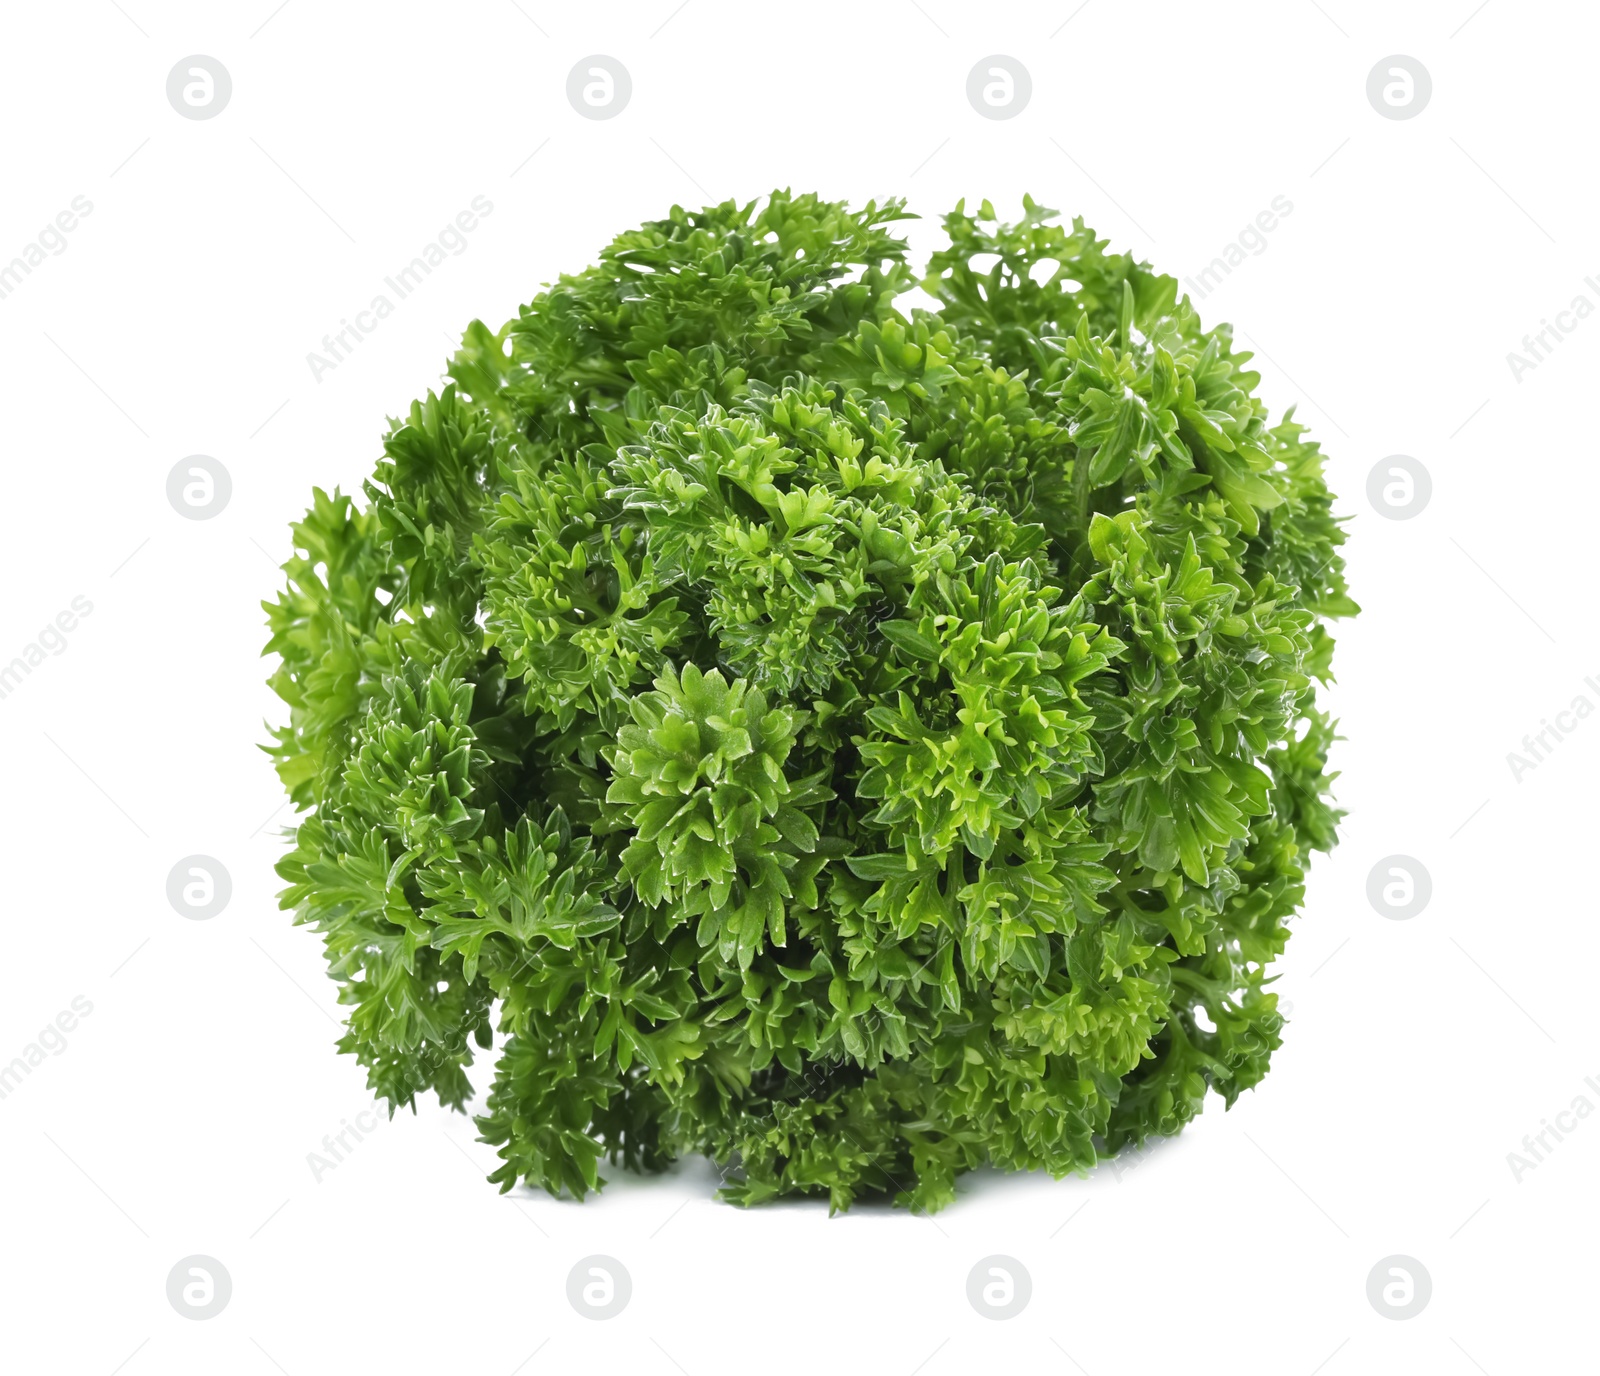 Photo of Bunch of fresh green parsley on white background